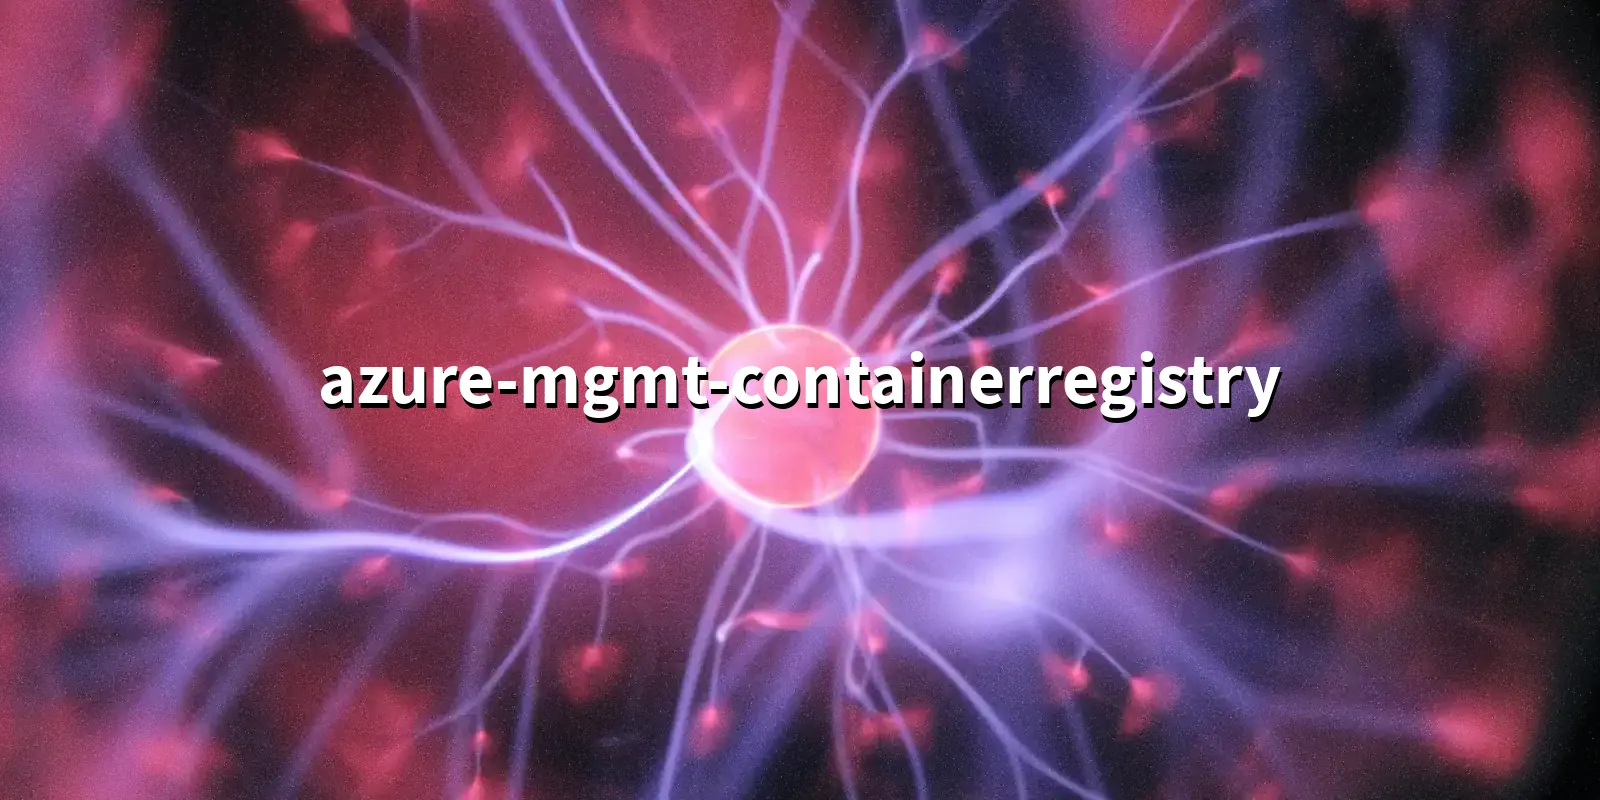 /pkg/a/azure-mgmt-containerregistry/azure-mgmt-containerregistry-banner.webp